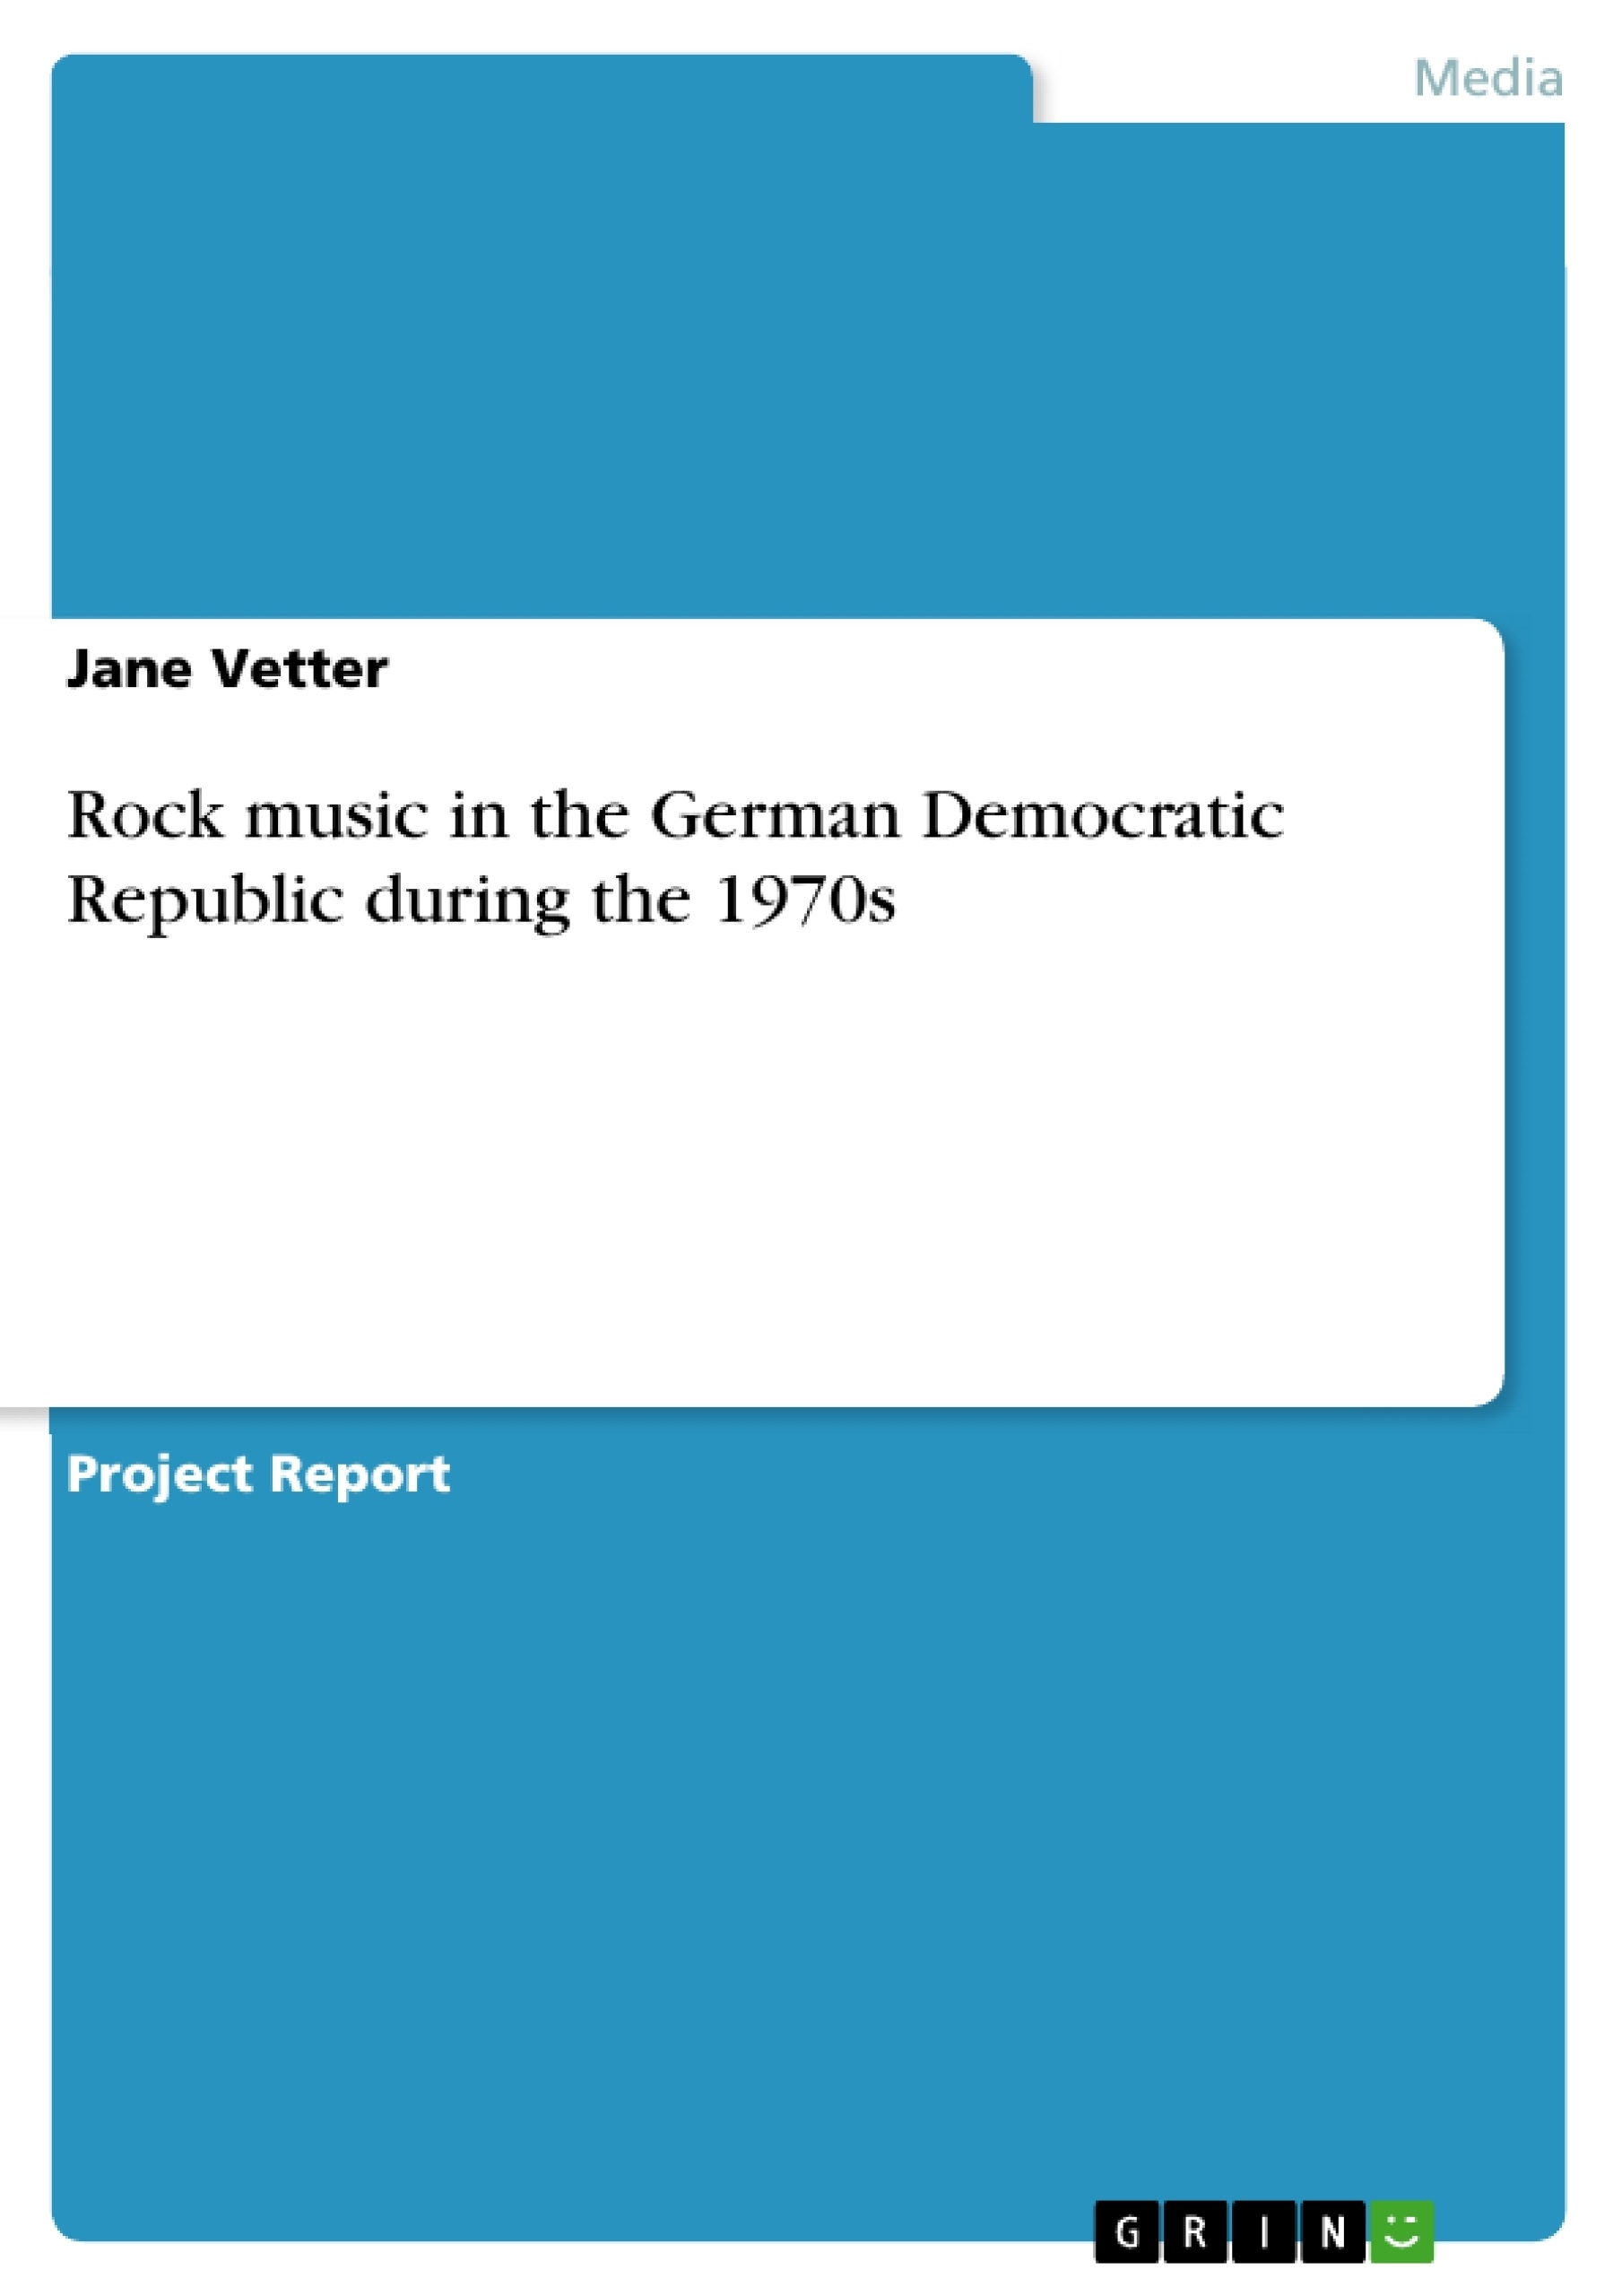 Title: Rock music in the German Democratic Republic during the 1970s